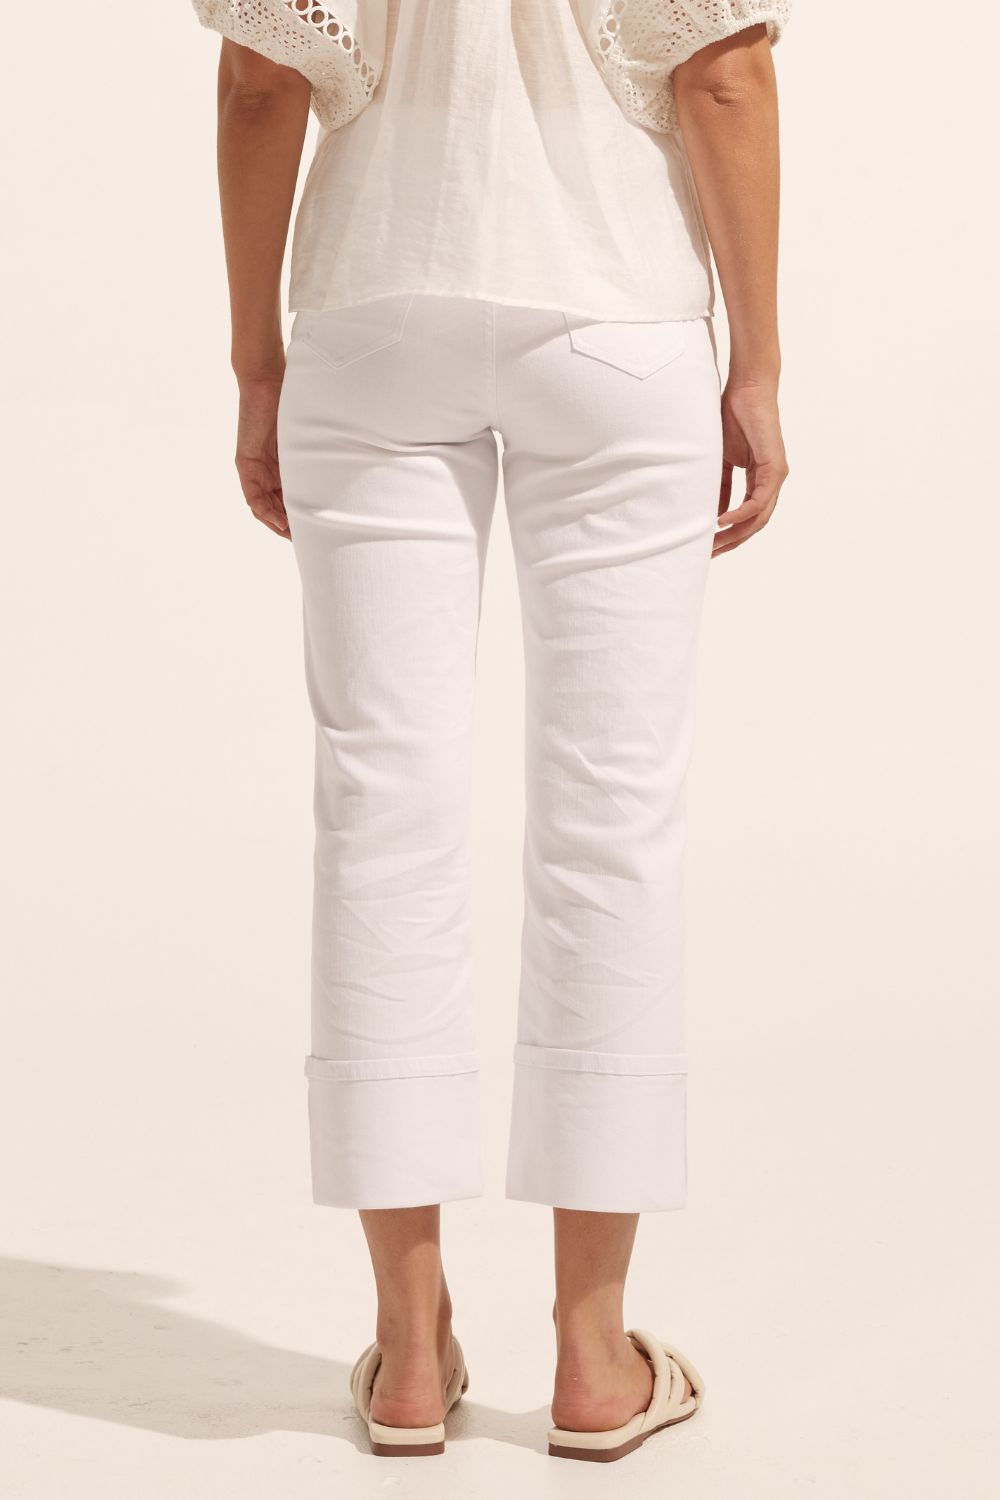 white, pant, cuffed jeans, mid rise jean, straight cut, back image